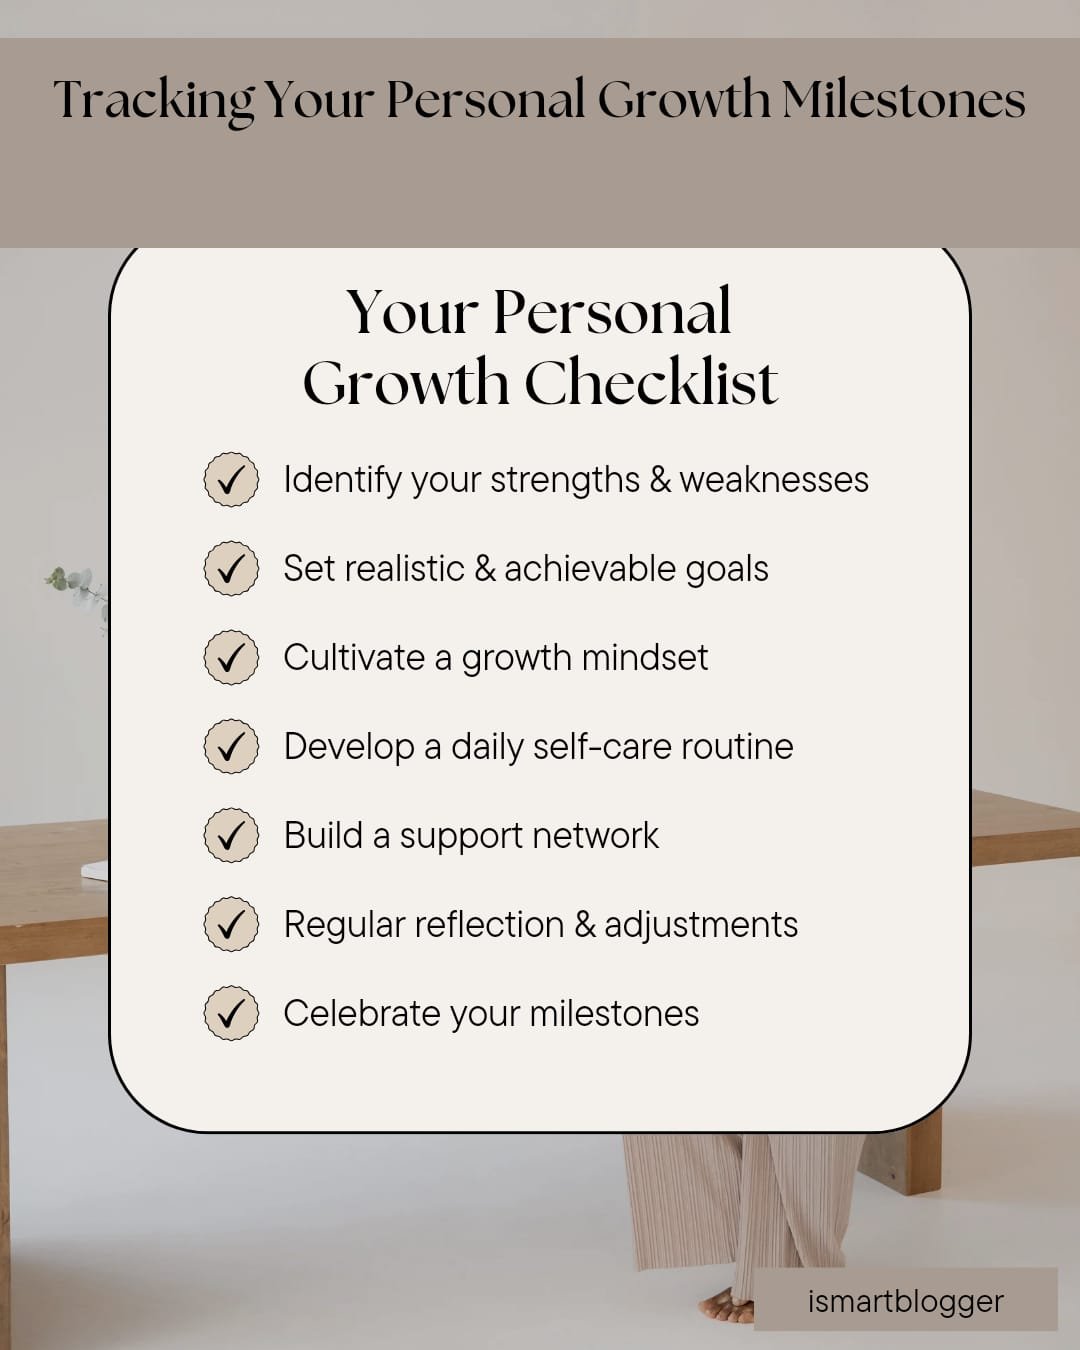 Measuring Progress: Tracking Your Personal Growth Milestones